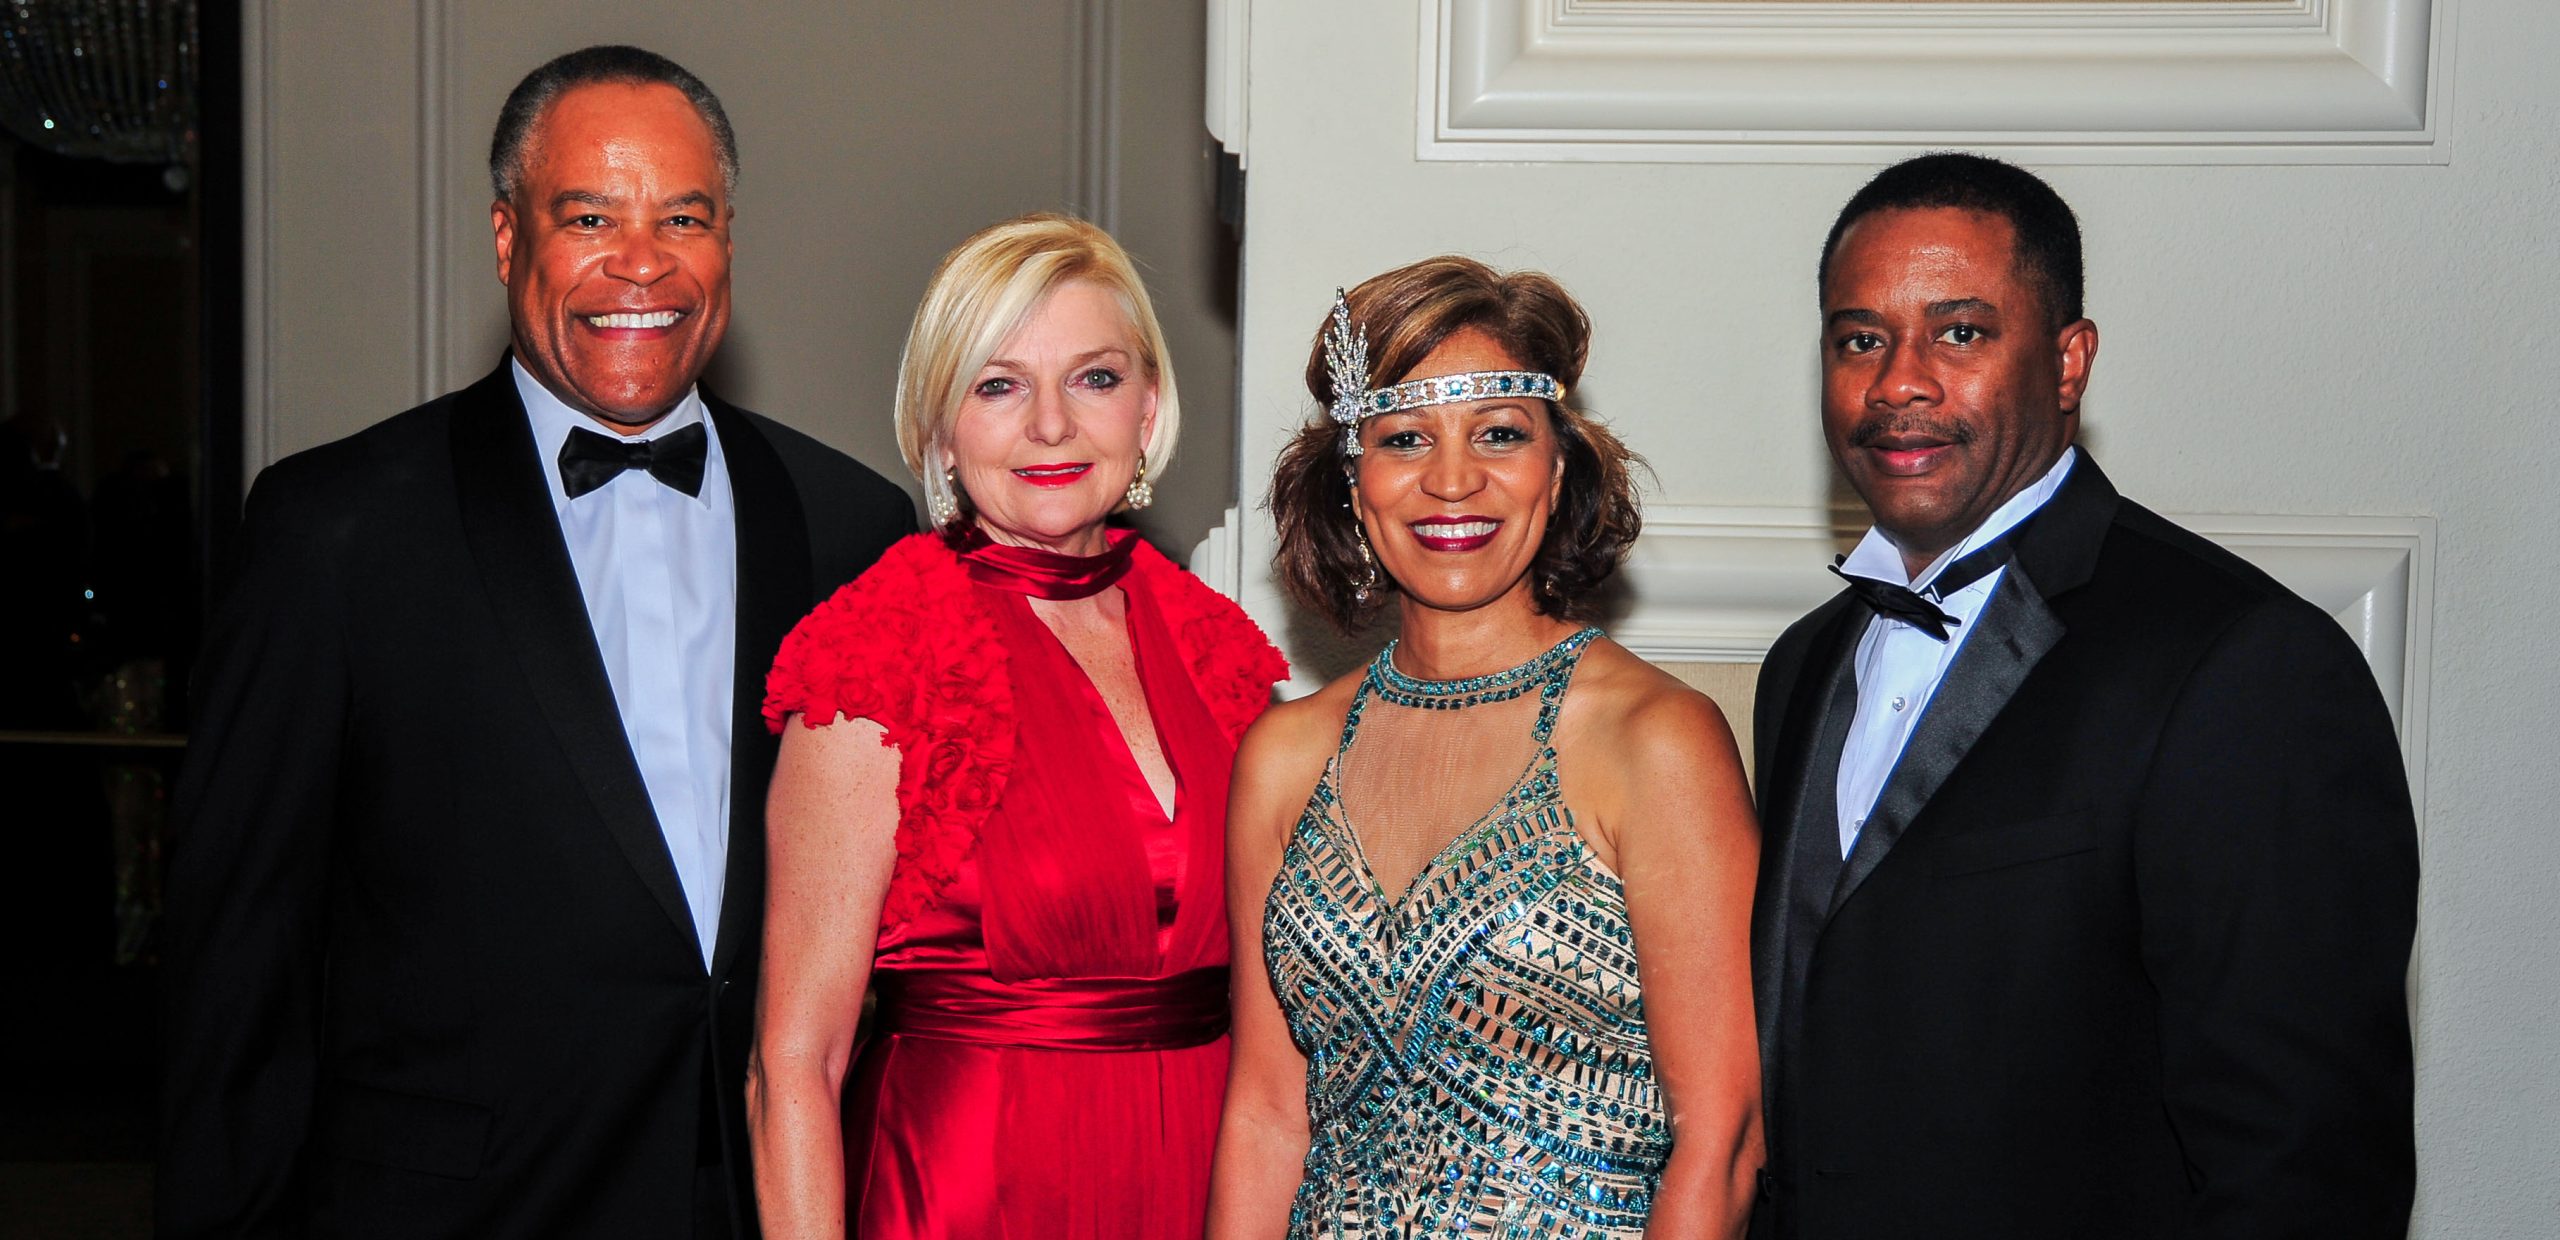 Central San Diego Black Chamber of Commerce honors Jesse Knight at 5th Annual Fundraising and Awards Gala